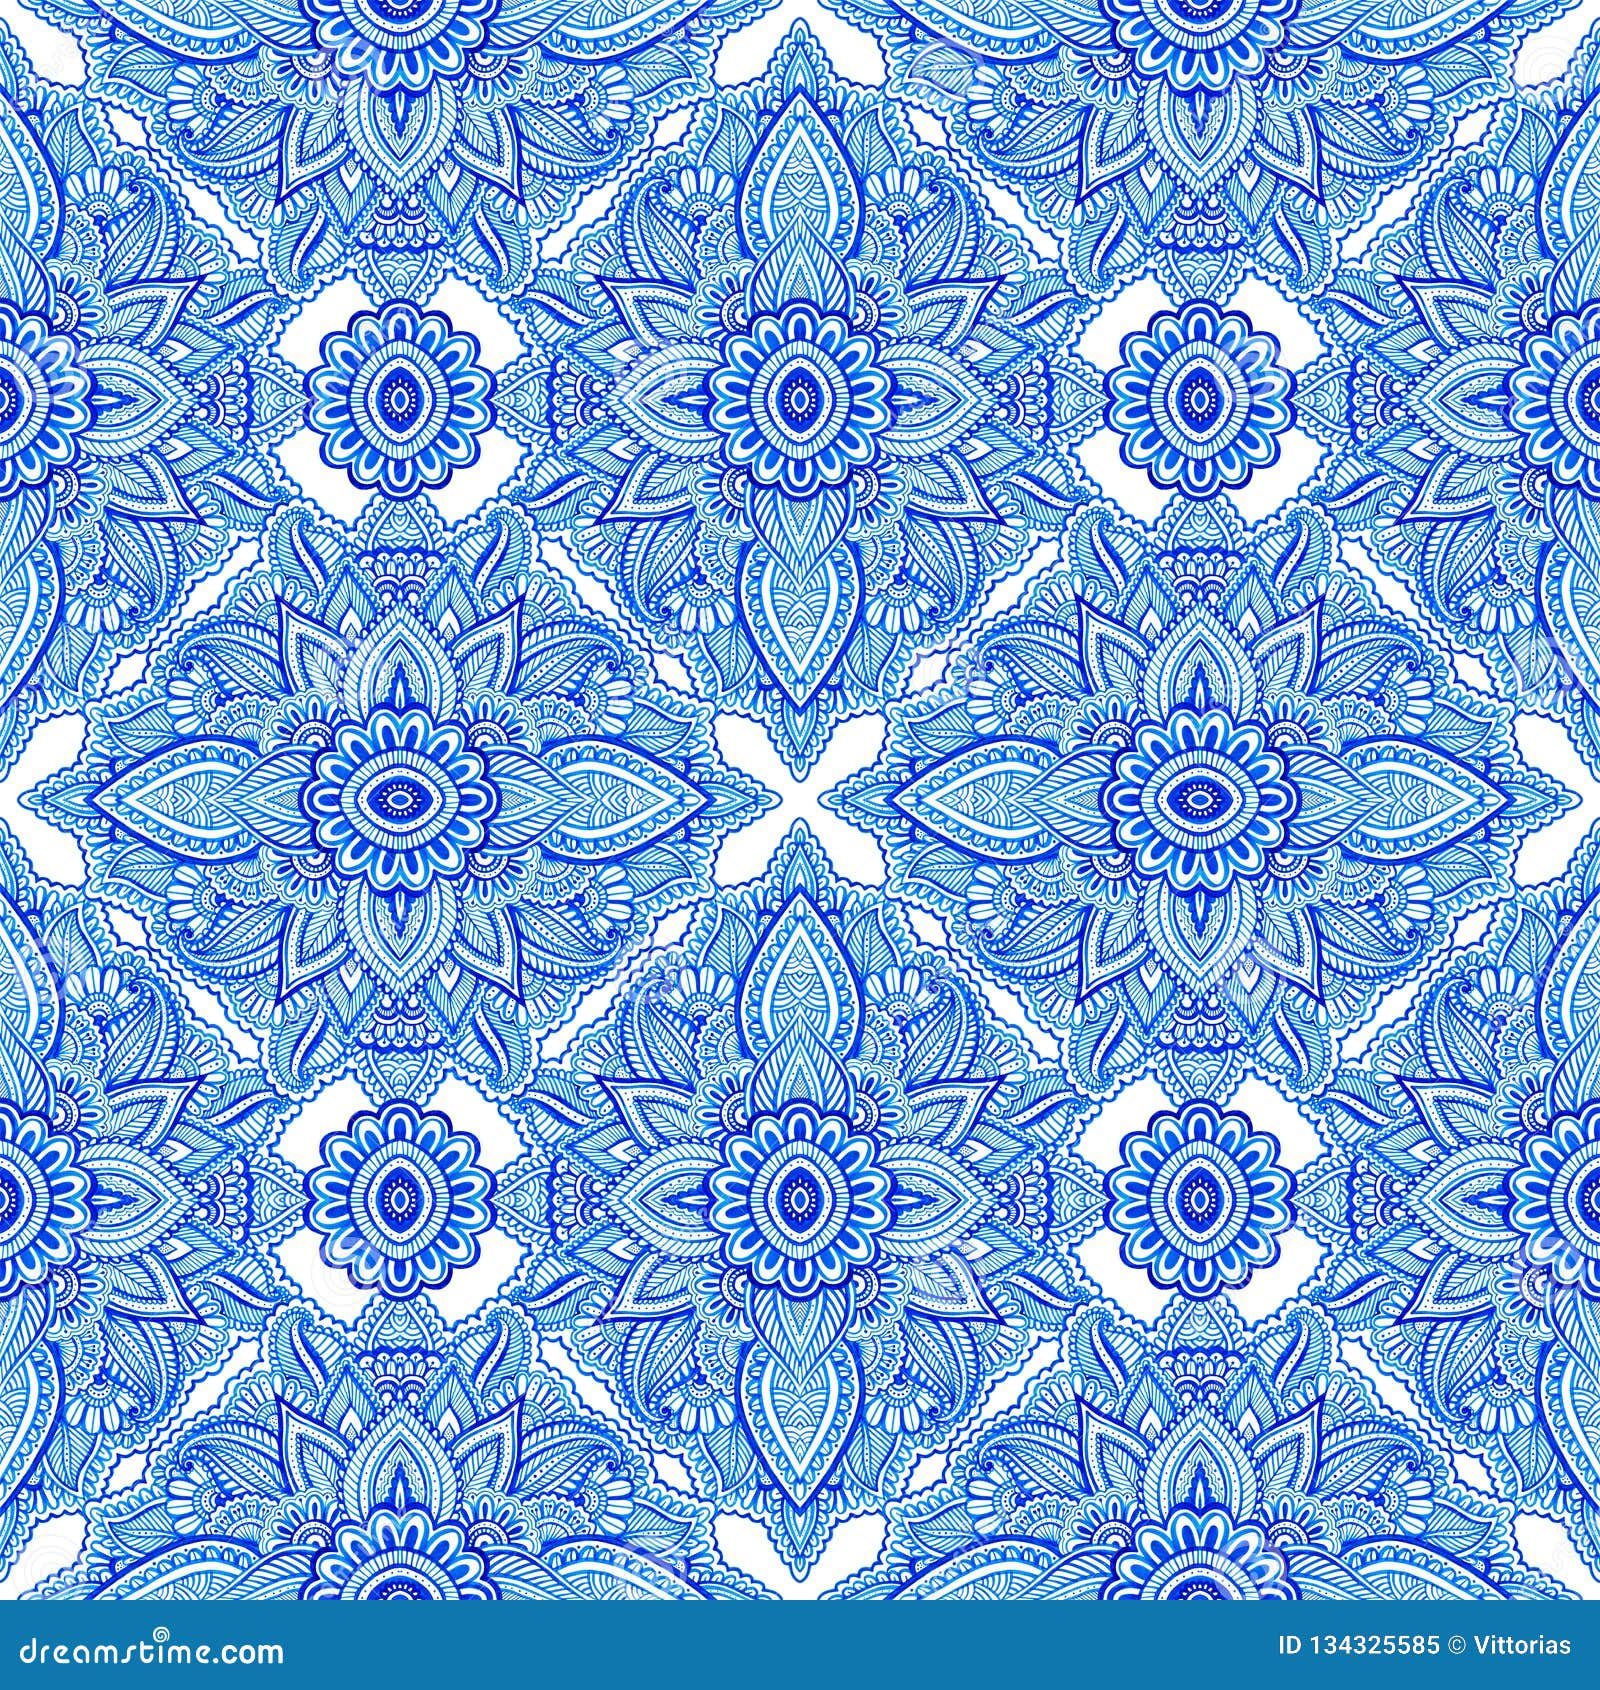 Ink Seamless  Pattern With Abstract Motifs  Stock 